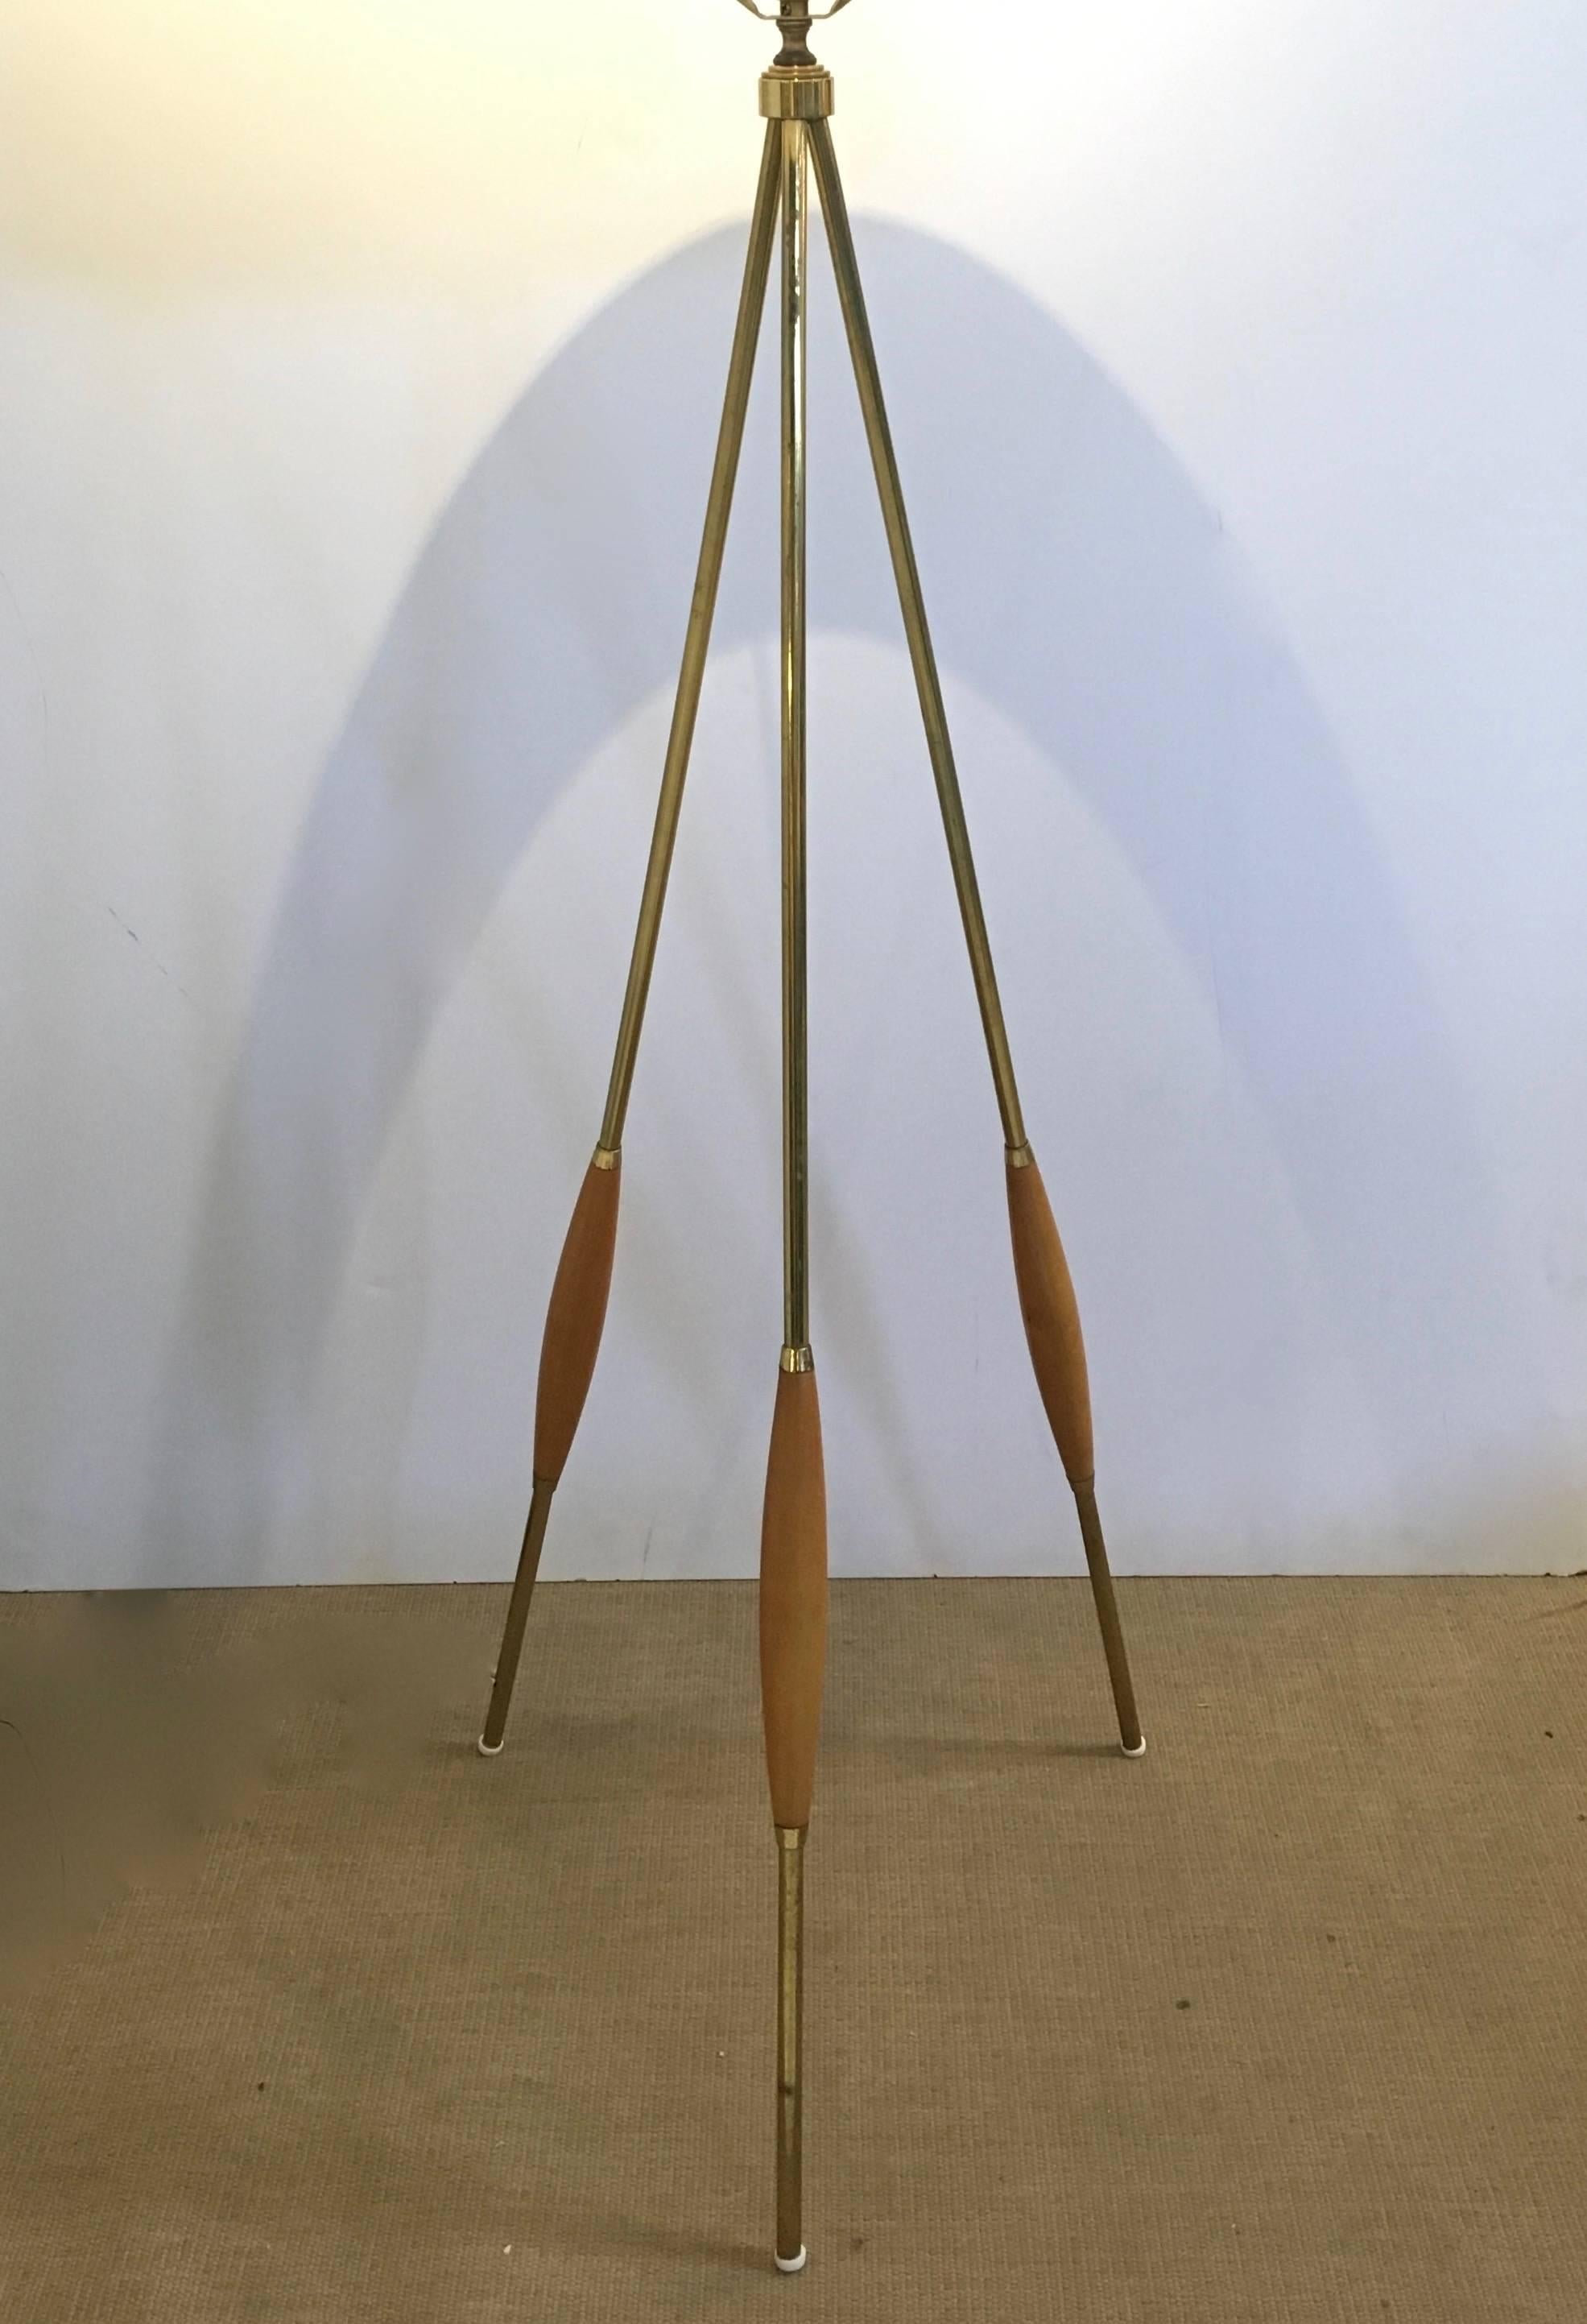 This is a vintage Mid-Century tripod floor lamp attributed to Gerald Thurston, for Lightolier in the 1950s, USA. It features a brass finish base and walnut accents on the legs. The original integrated harp is intact, newly rewired, with new, period